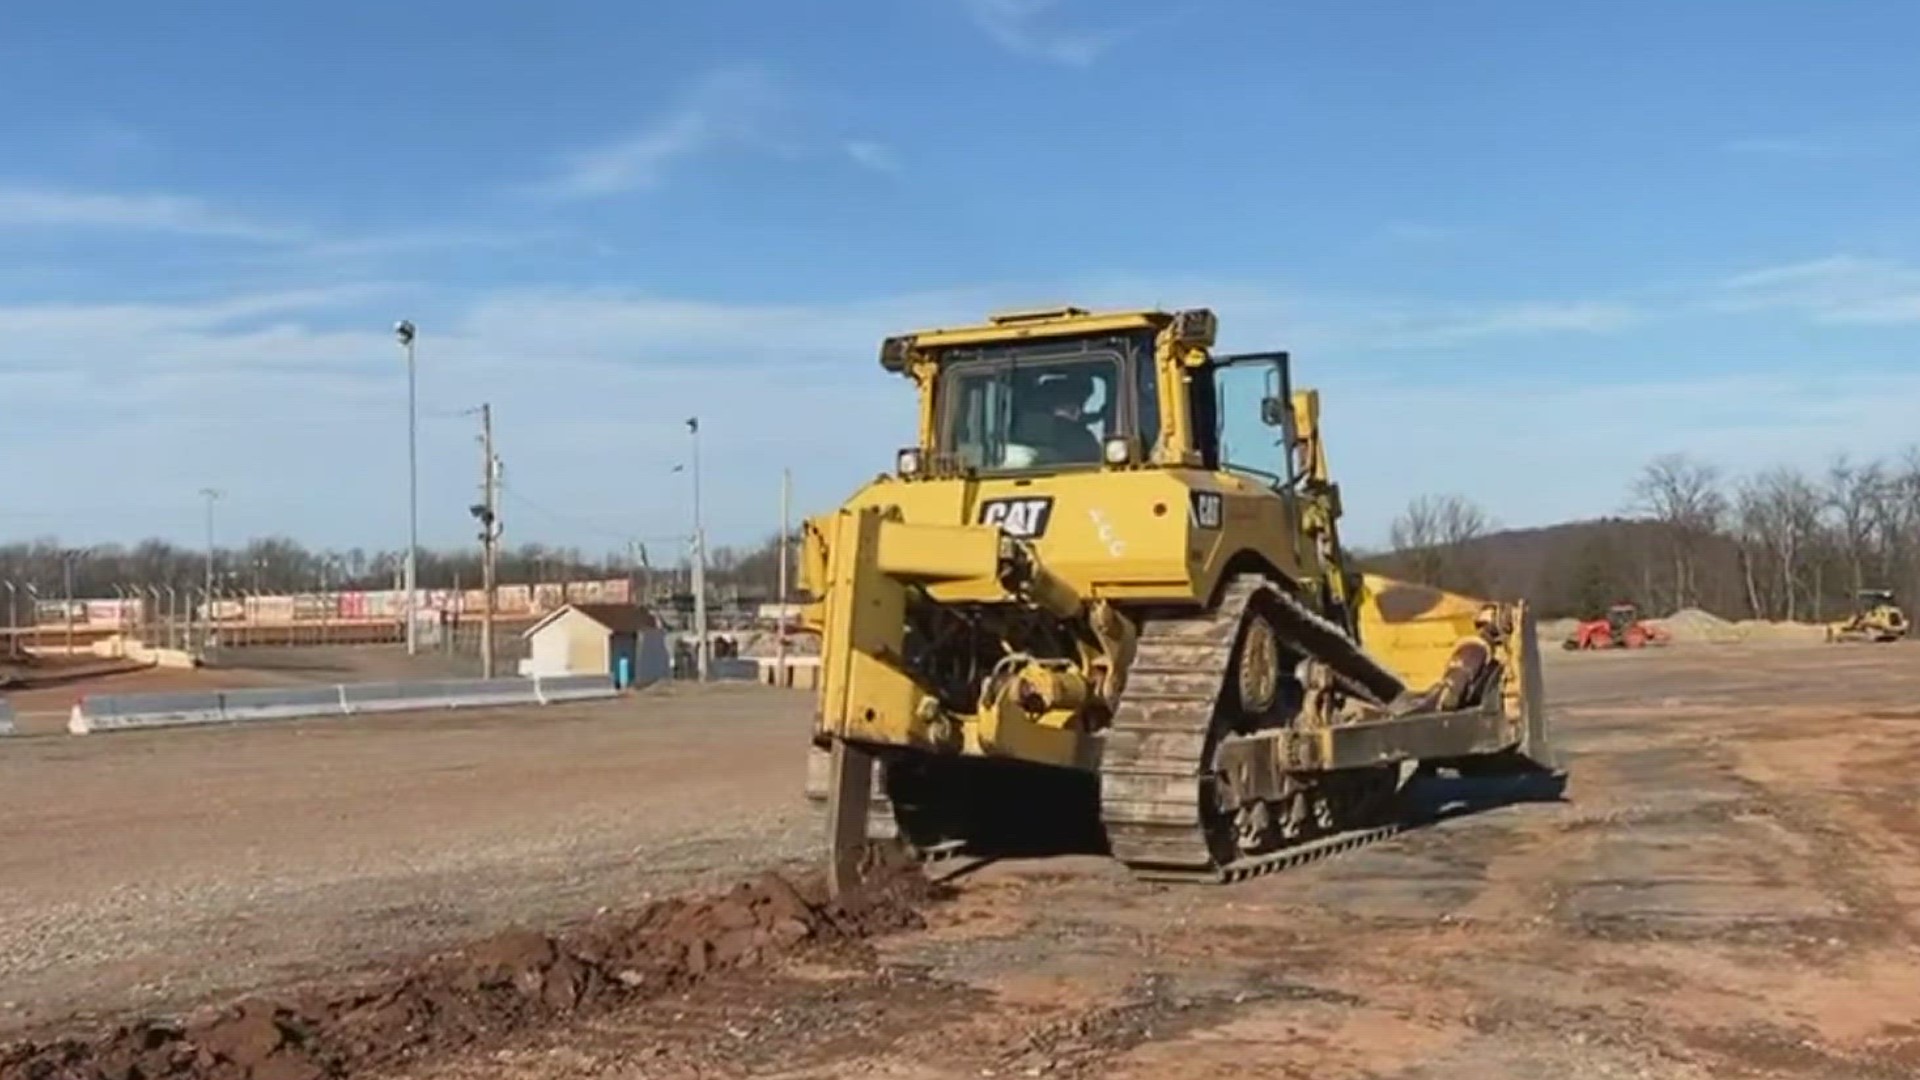 BAPS breaks ground on new track; schedules released for Outlaws and